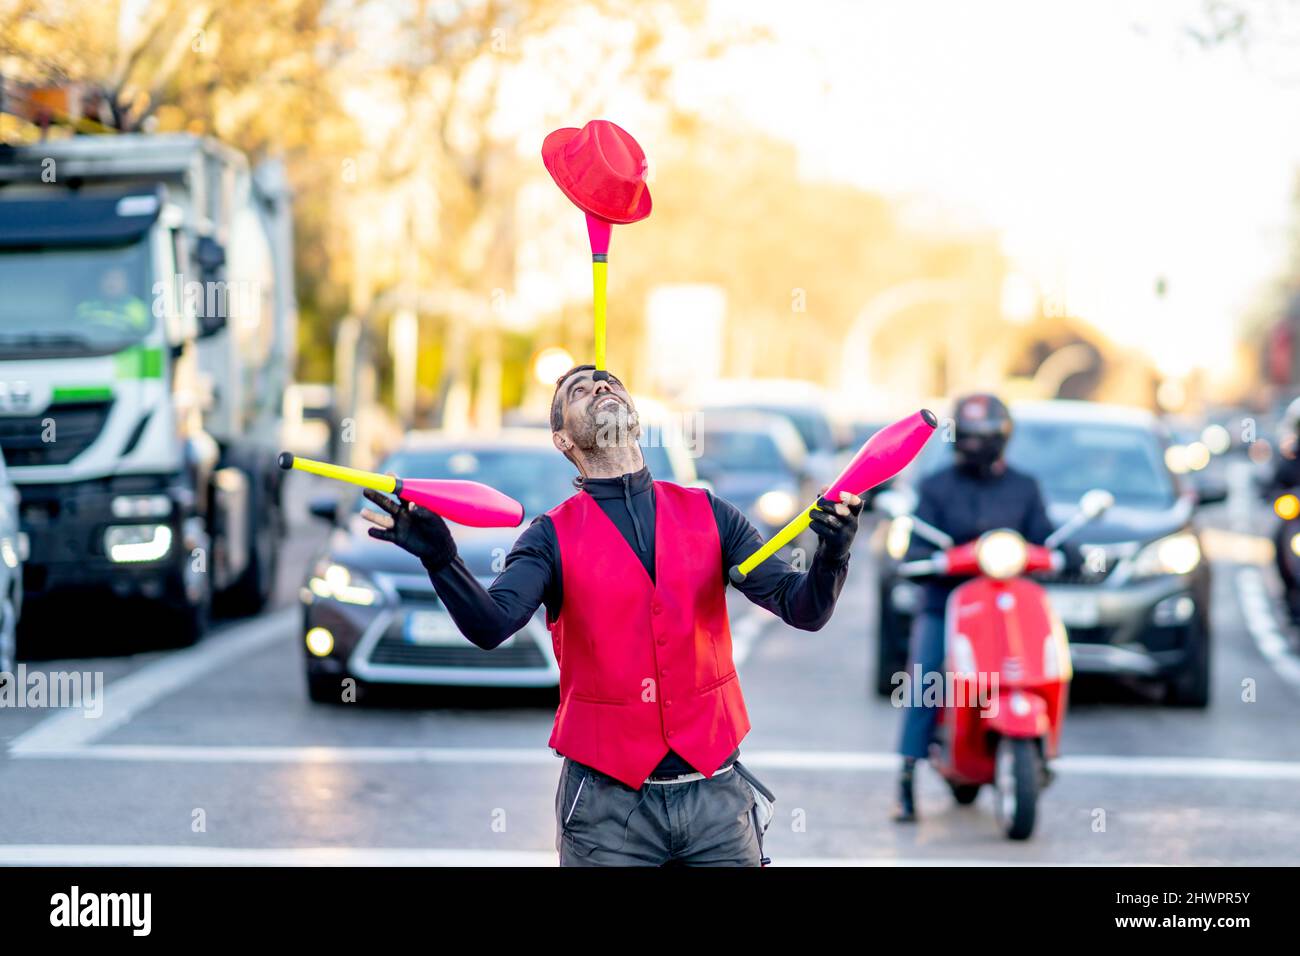 Performer balancing juggling pin and hat on nose in front of cars Stock Photo